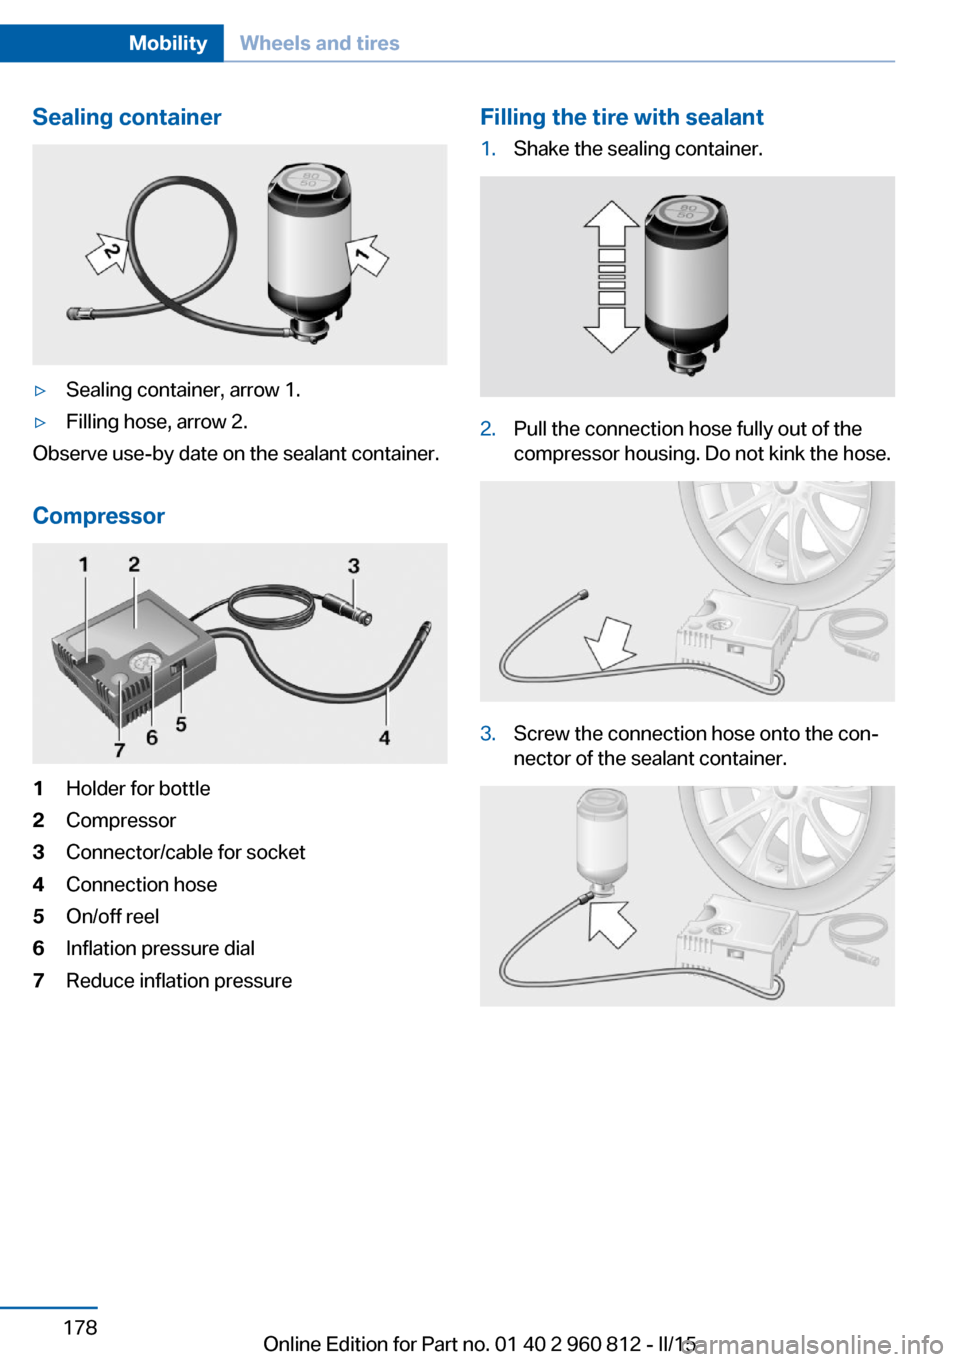 BMW M4 CONVERTIBLE 2015 F83 User Guide Sealing container▷Sealing container, arrow 1.▷Filling hose, arrow 2.
Observe use-by date on the sealant container.
Compressor
1Holder for bottle2Compressor3Connector/cable for socket4Connection ho